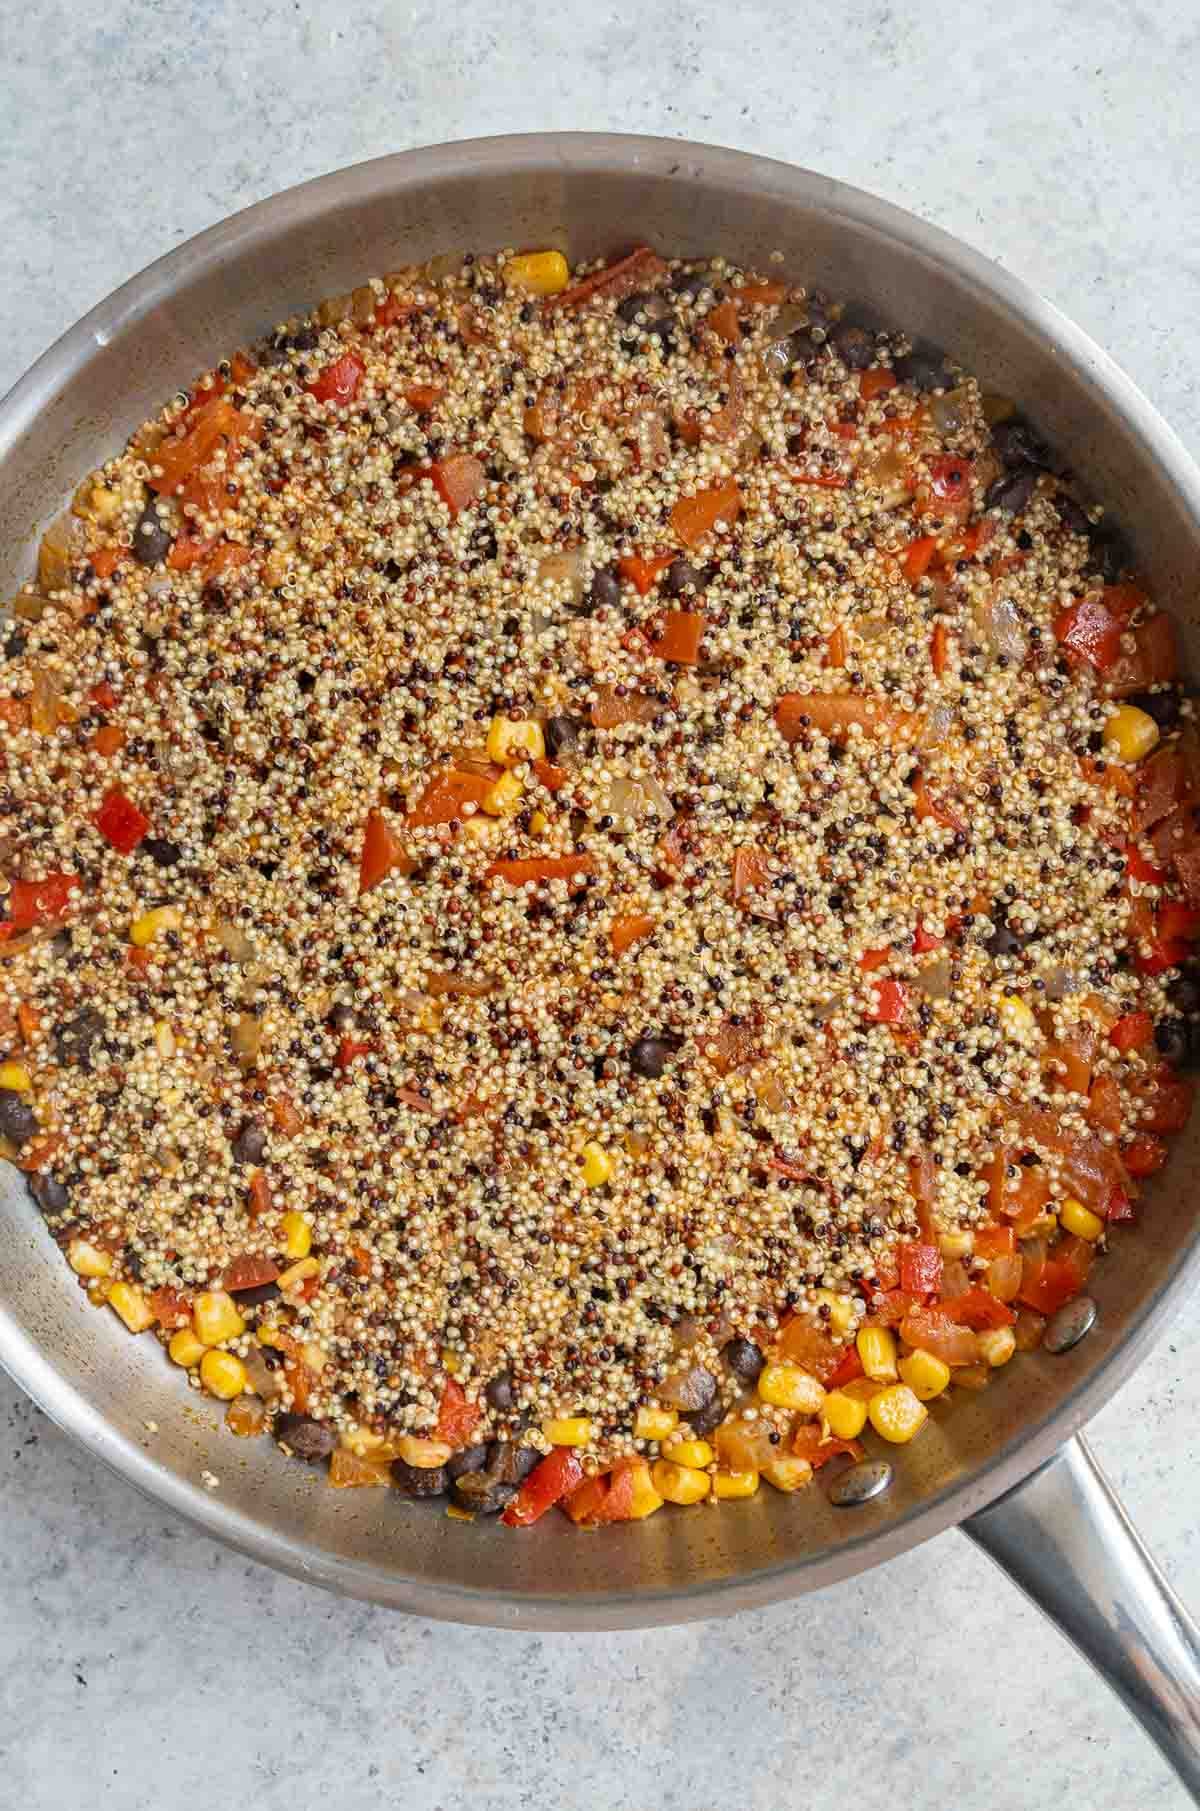 Cooked quinoa and vegetables